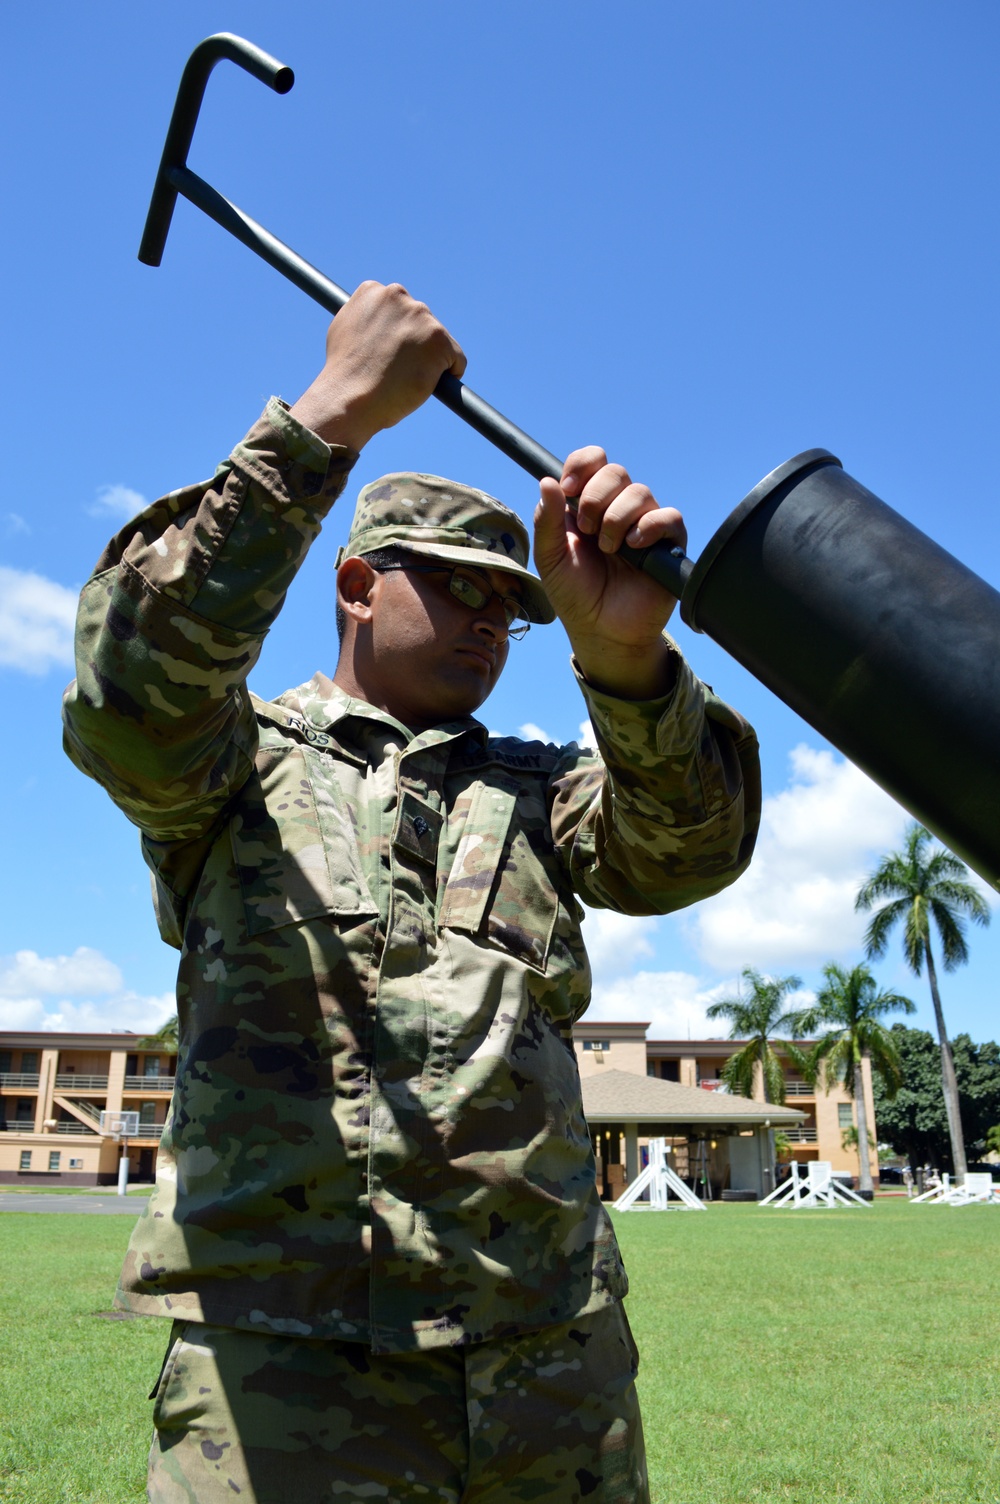 Sergeant’s Time Training: The M120 Mortar System